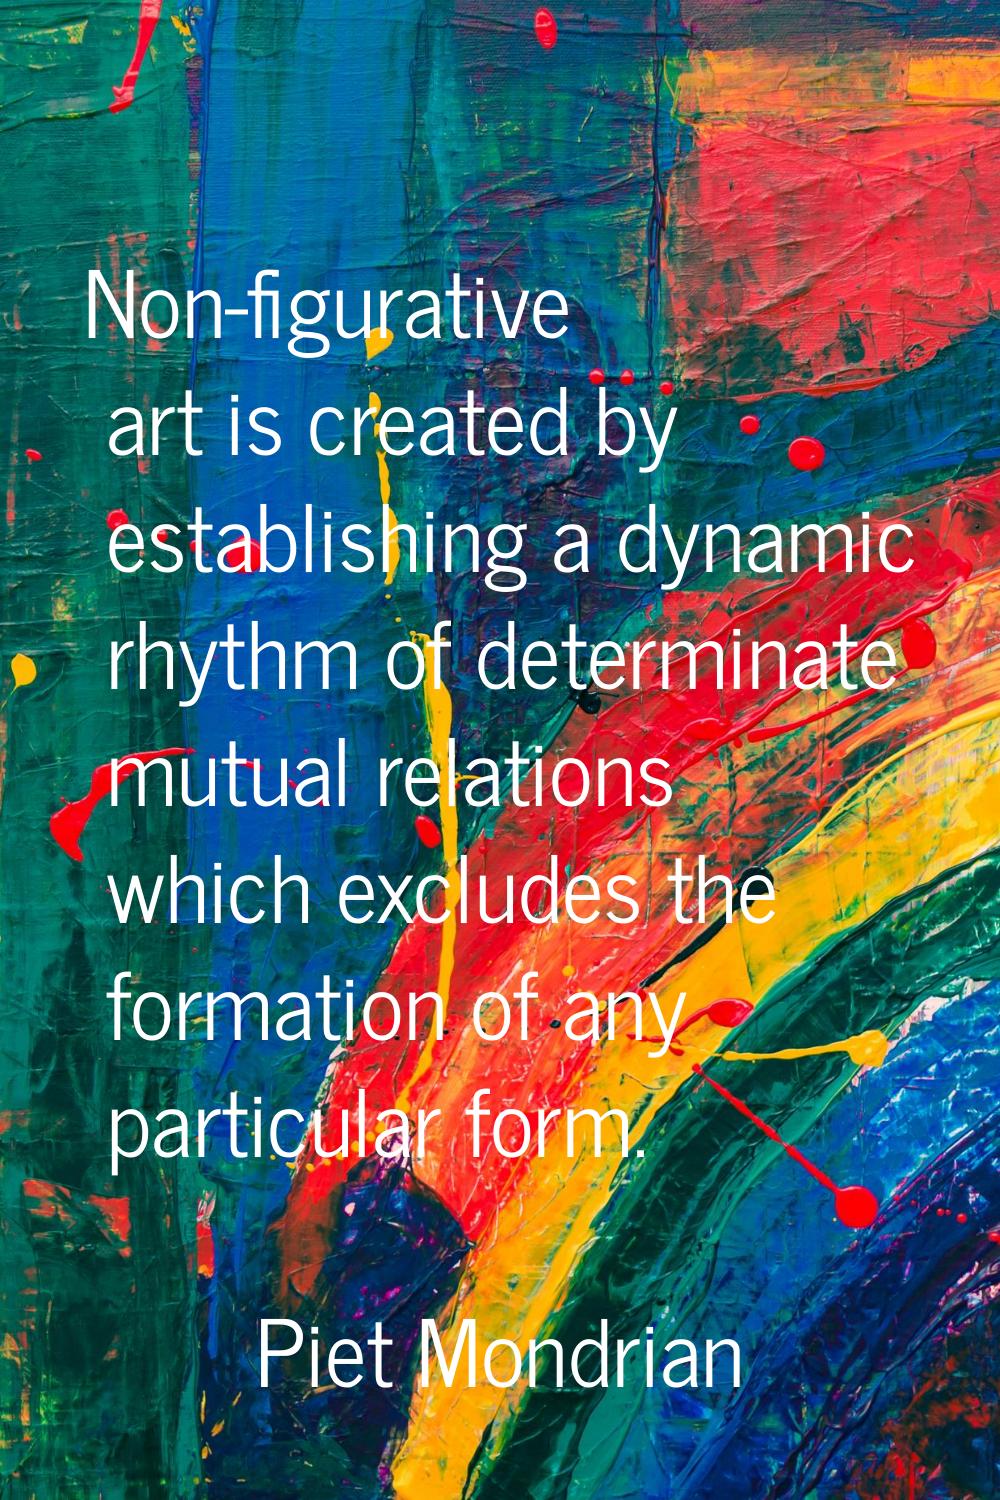 Non-figurative art is created by establishing a dynamic rhythm of determinate mutual relations whic